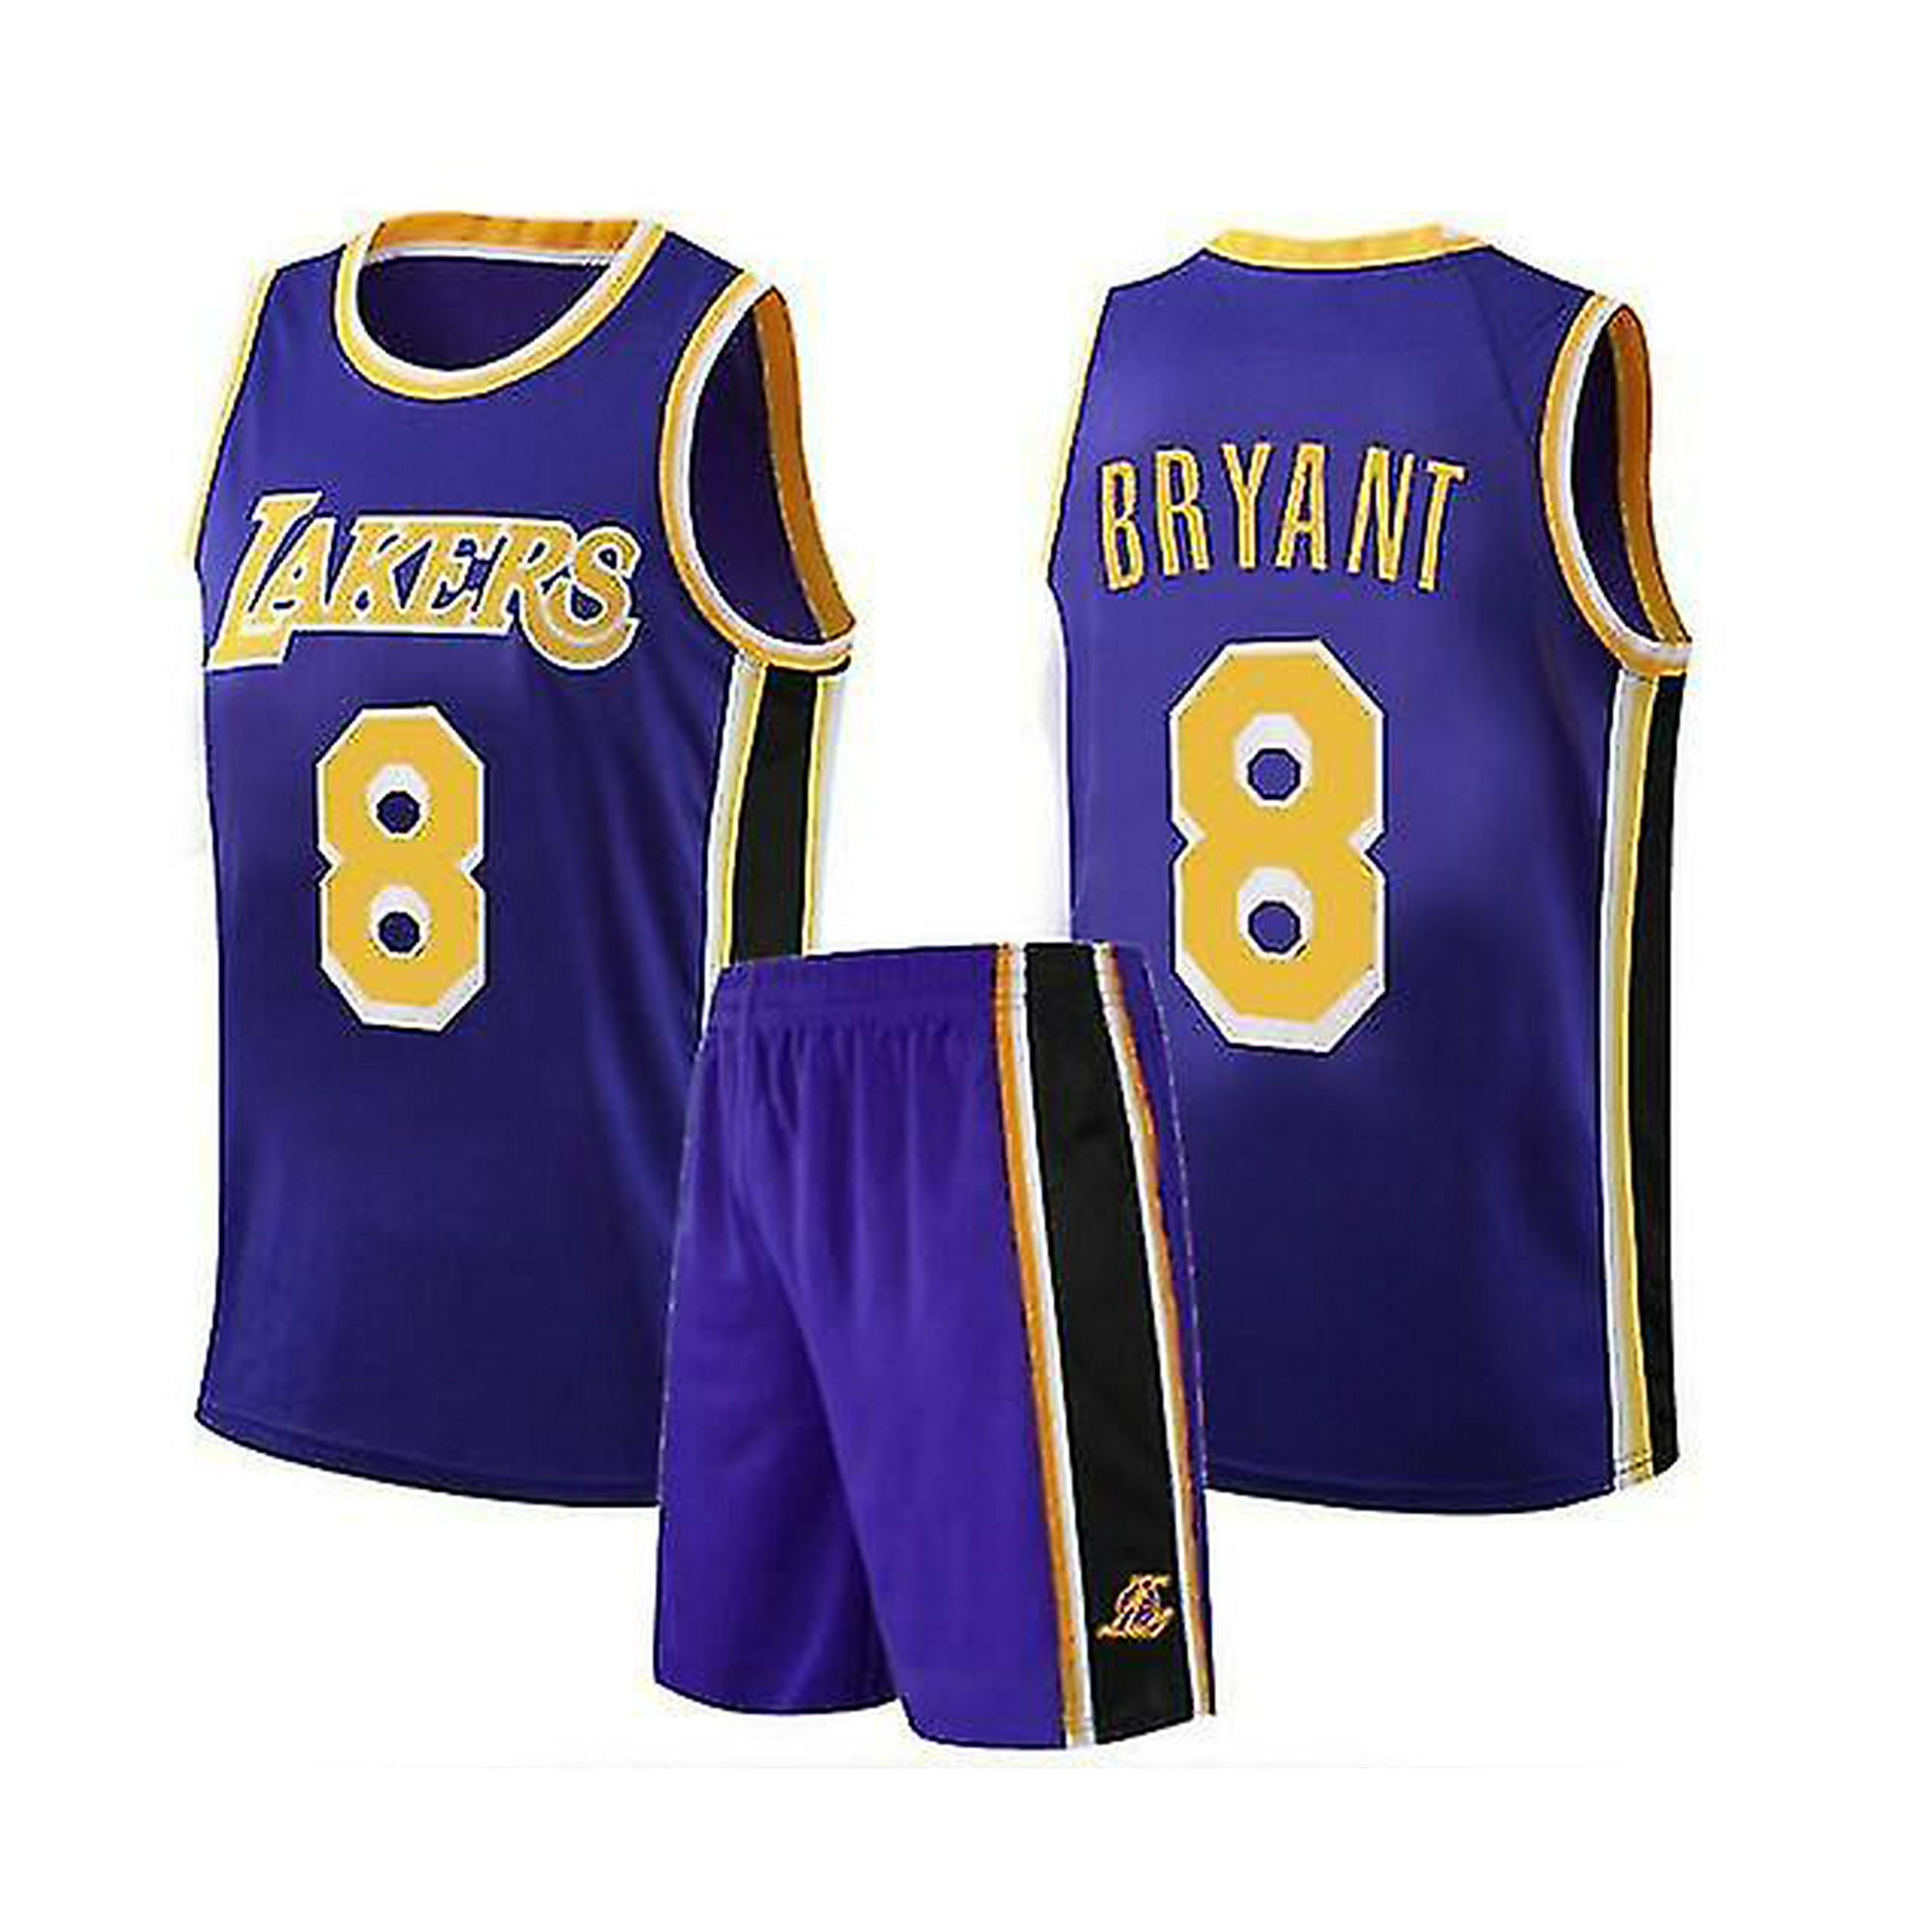 Pedymaquem Men's Basketball Jersey L.A. Lakers Bryant8#Splicing T-Shirt Player Jersey Shorts Sports Suit Size S-3xl Other Xxl 54